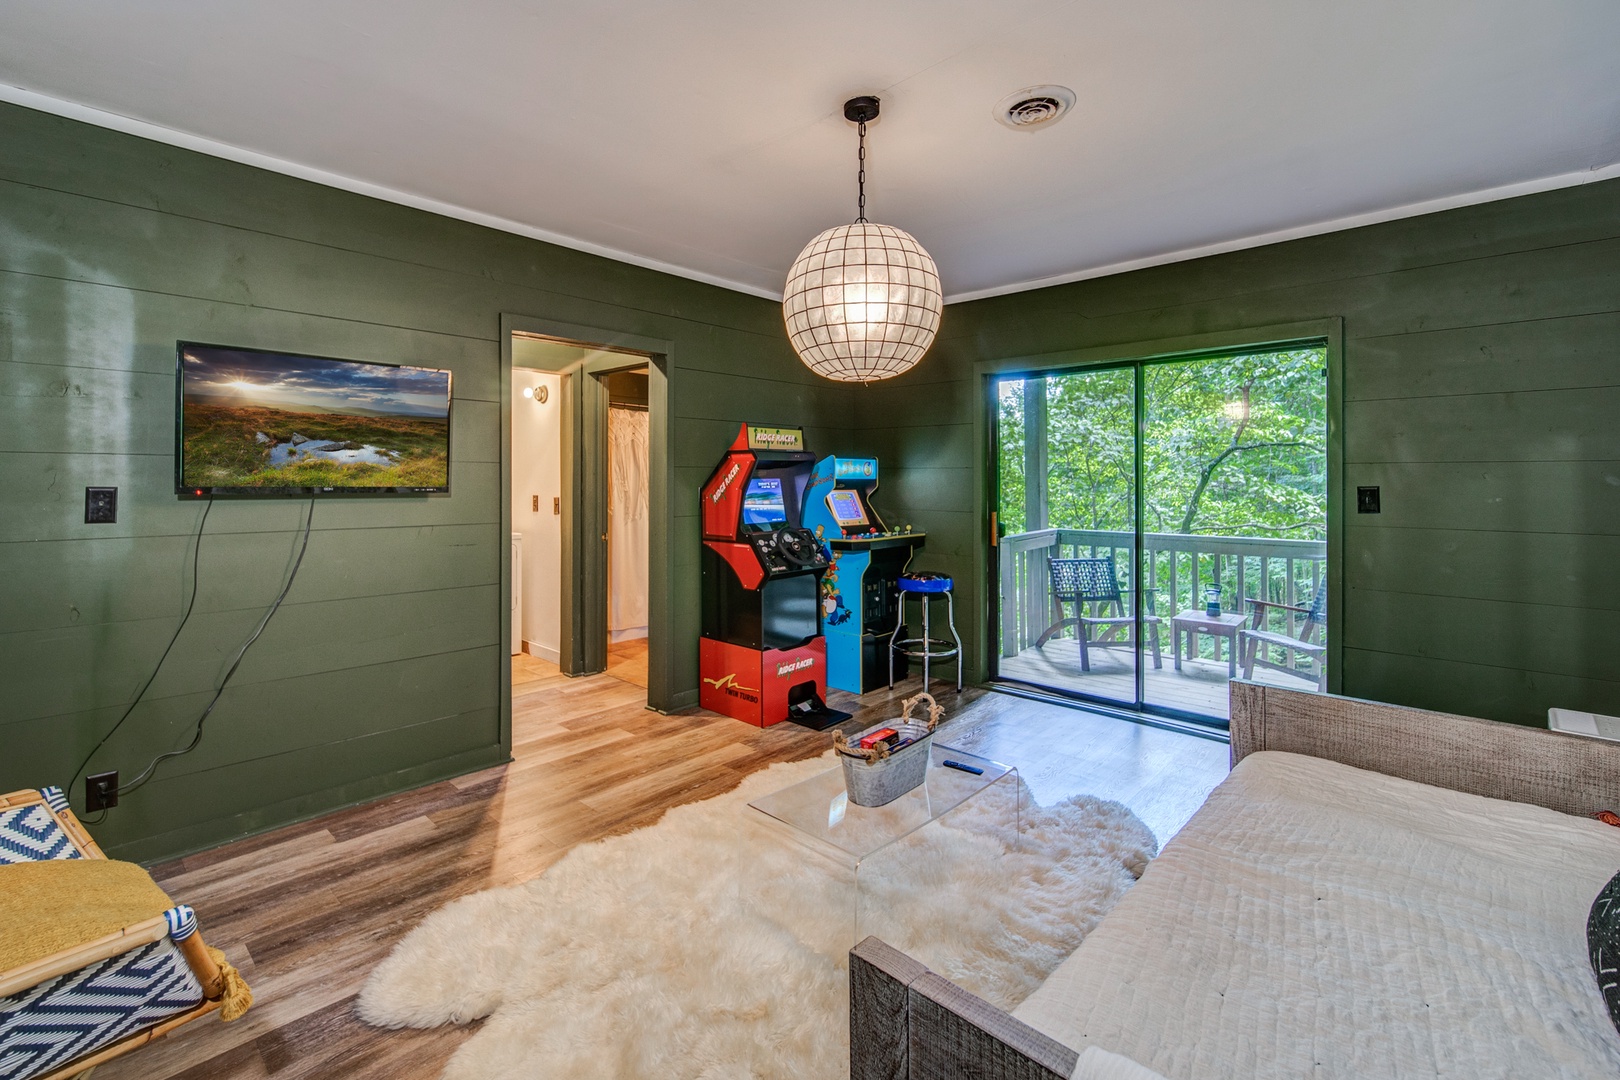 Send the kids downstairs to enjoy hanging out and playing arcade games in the lower-level game room